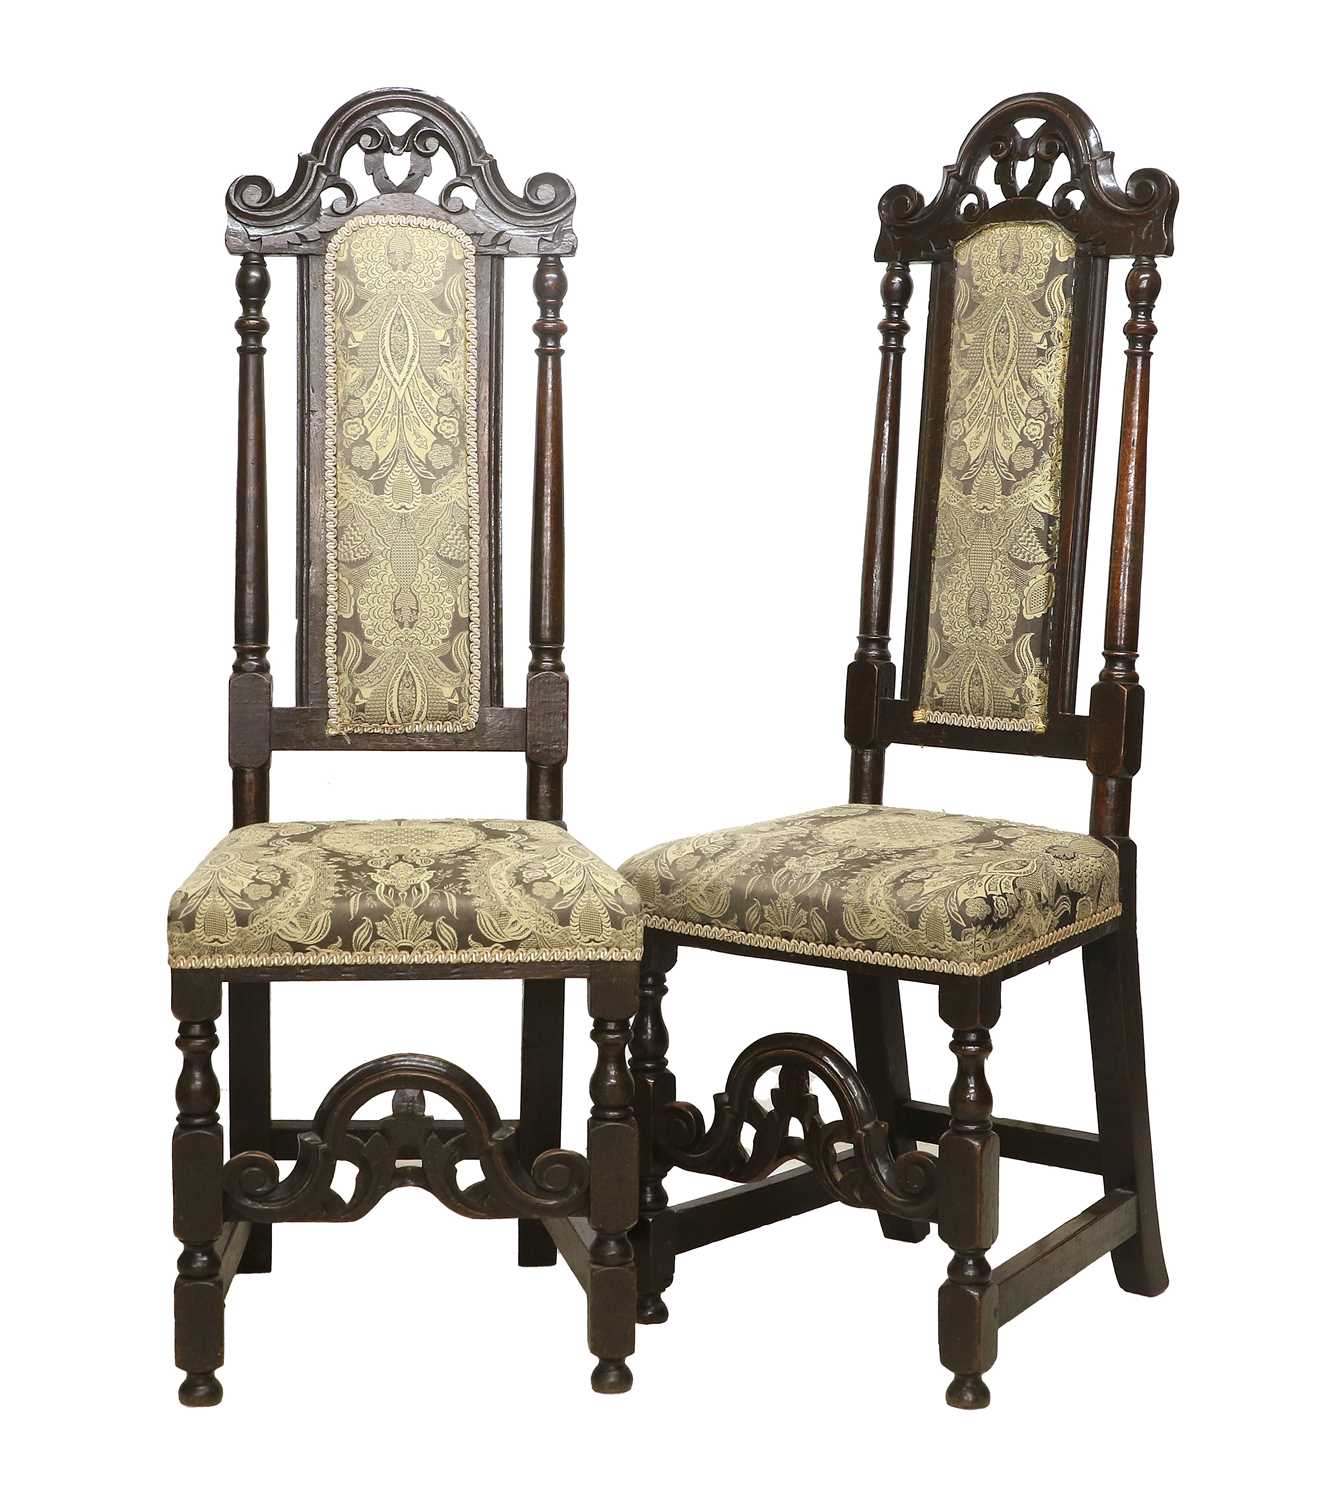 A Pair of Late 17th Century Carved Oak Back Stools, recovered in modern grey and cream paisley